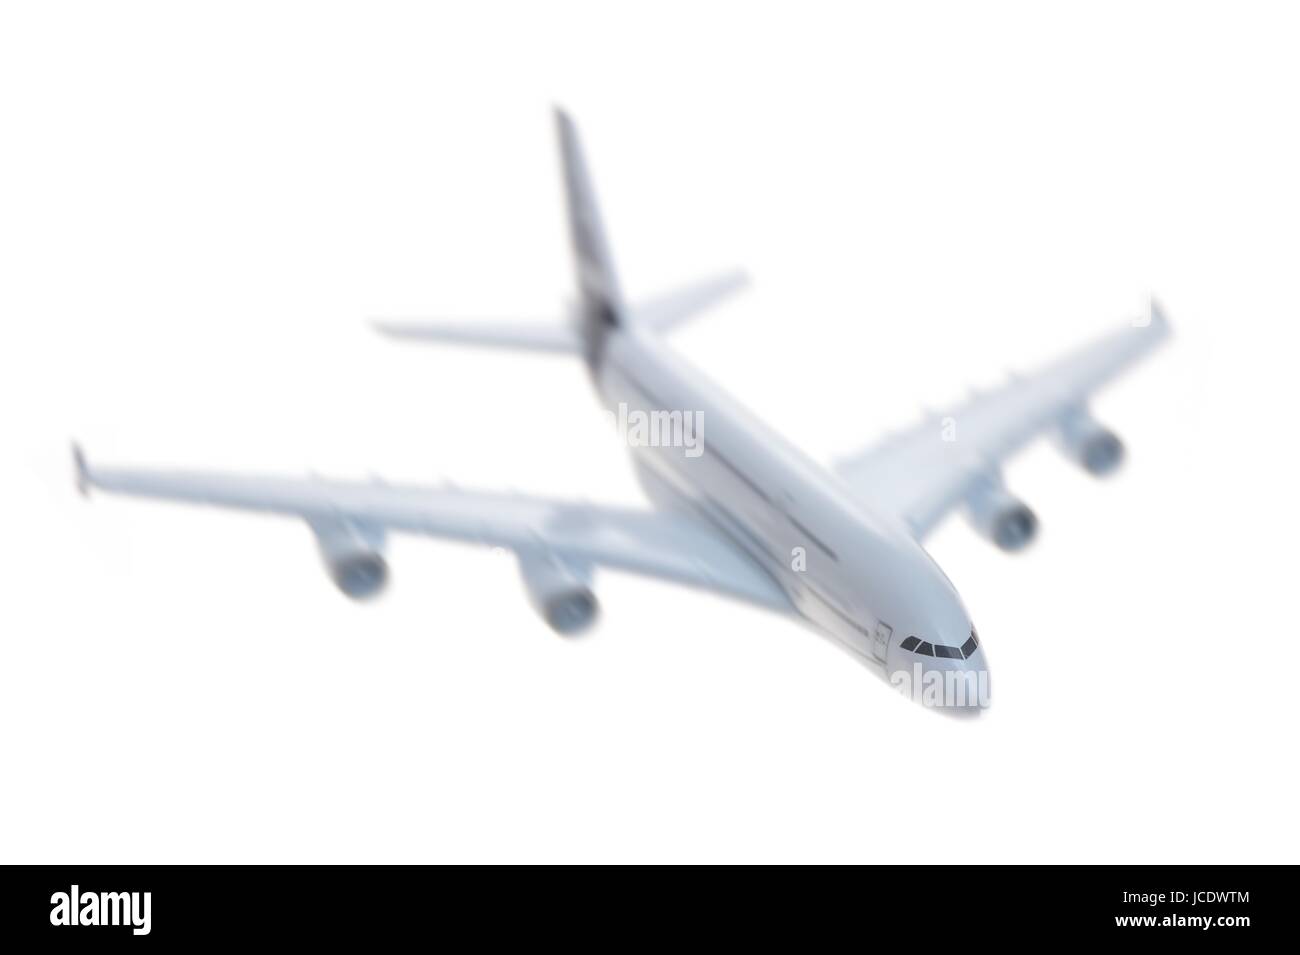 A close up shot of a die cast model plane Stock Photo